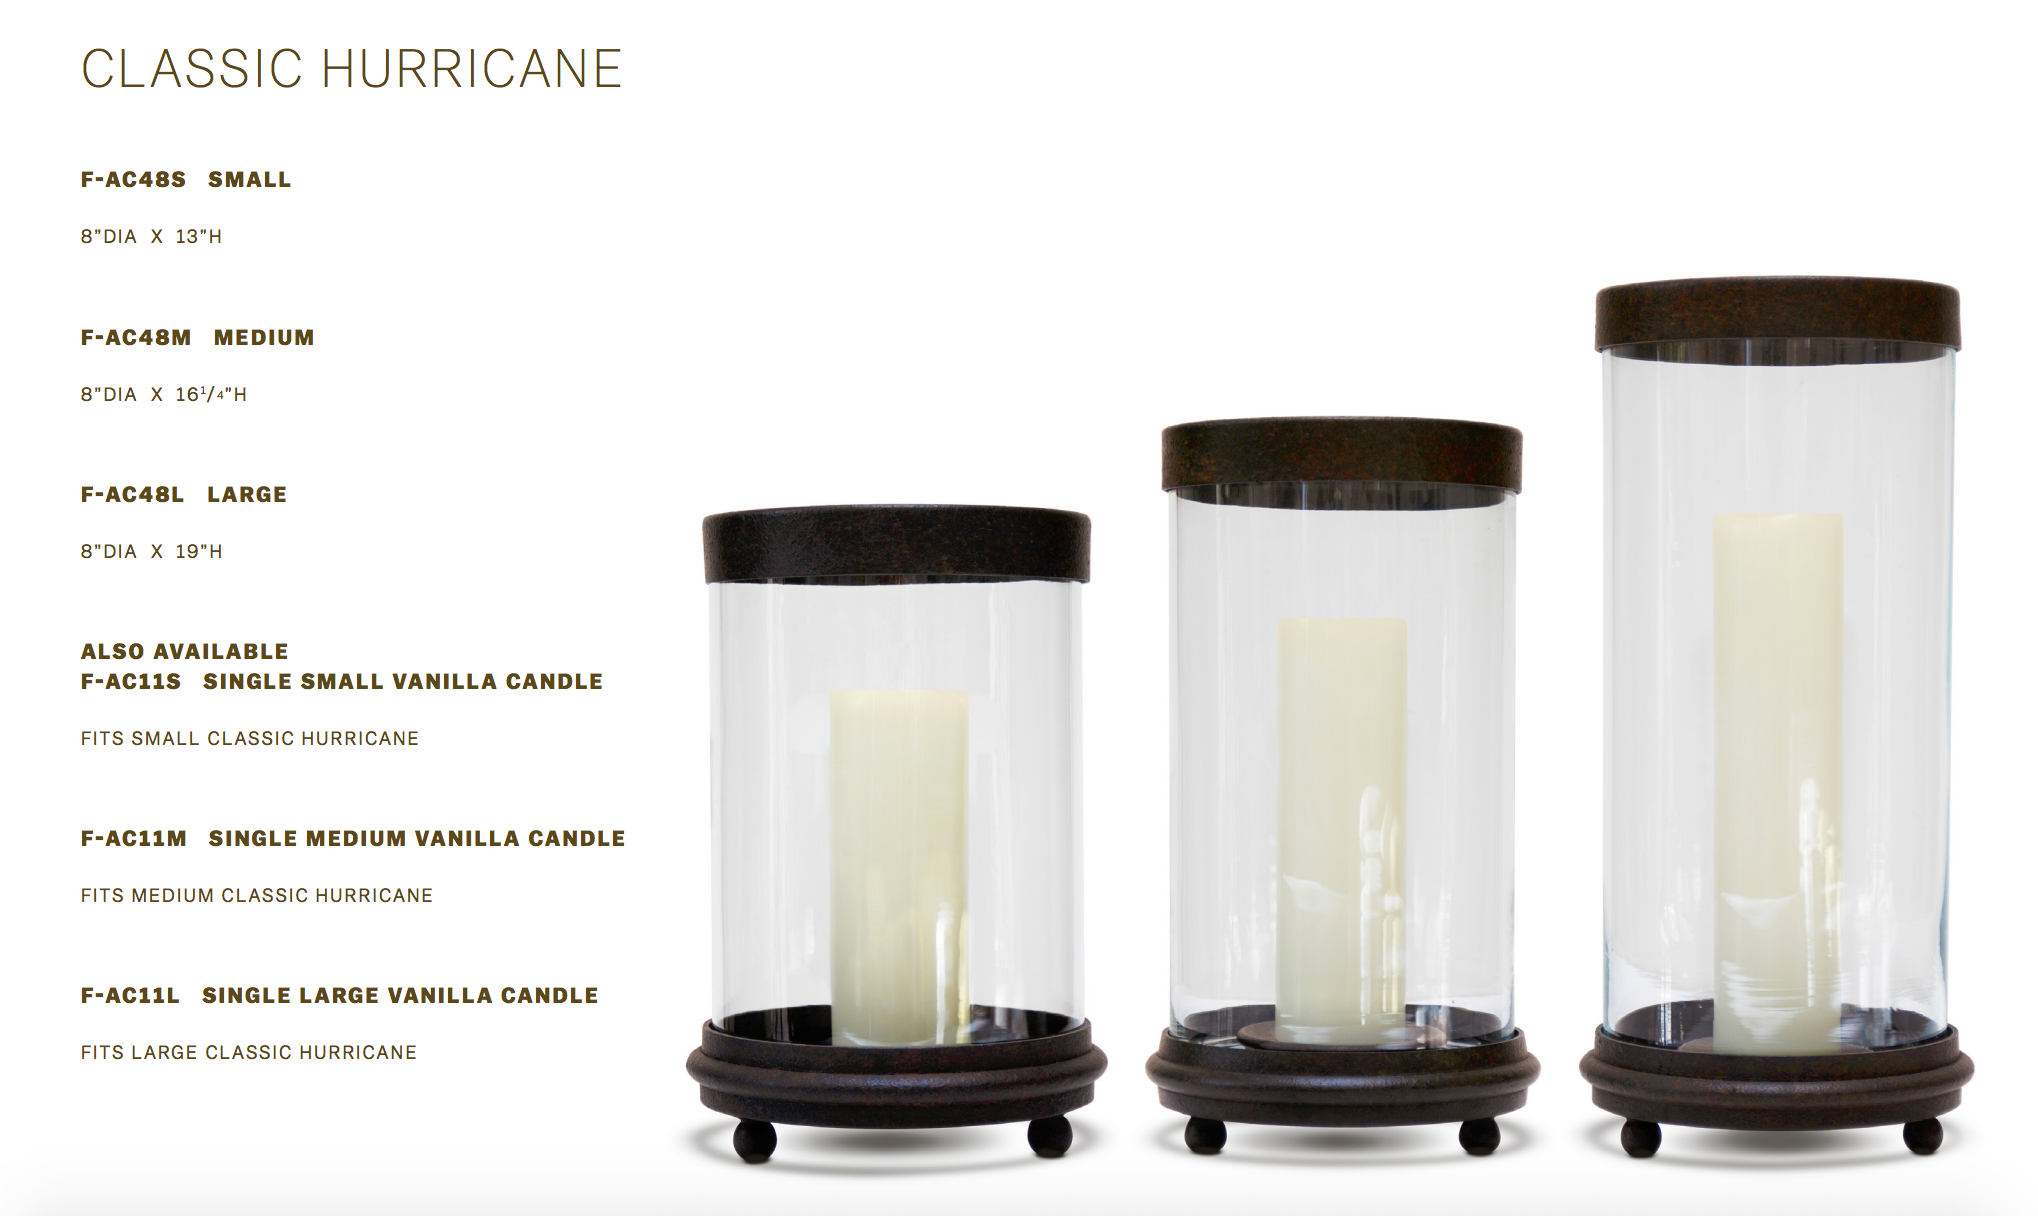 Beautiful High Quality Hurricane Lamps offered in 3 sizes at Formations USA